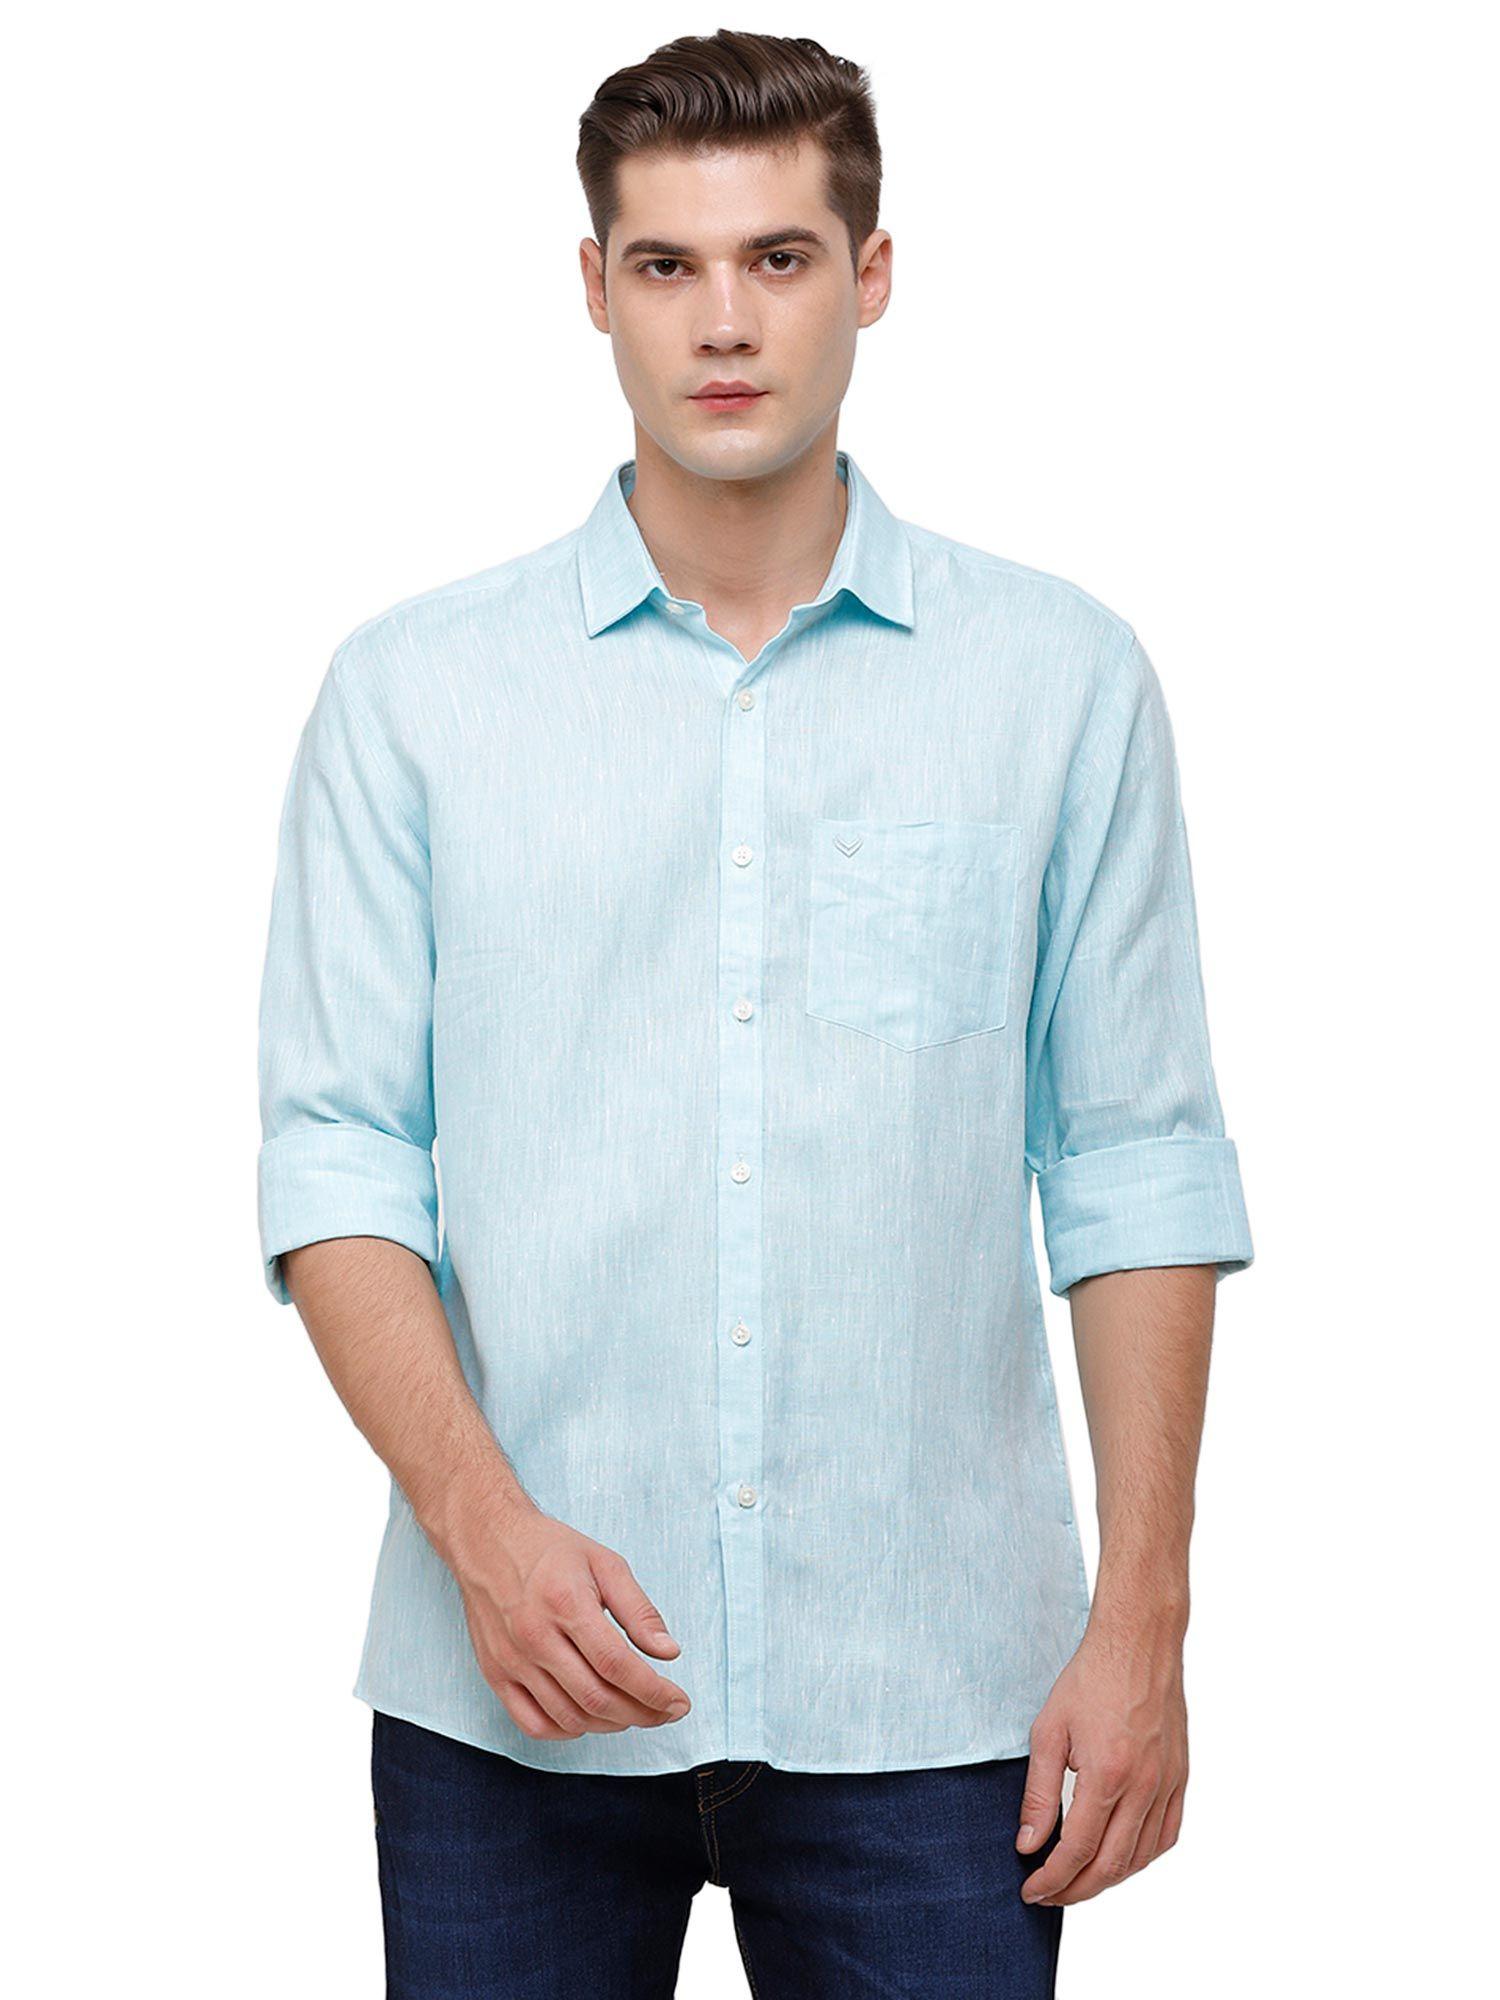 men's pure linen turquoise blue chambray regular fit full sleeve casual shirt